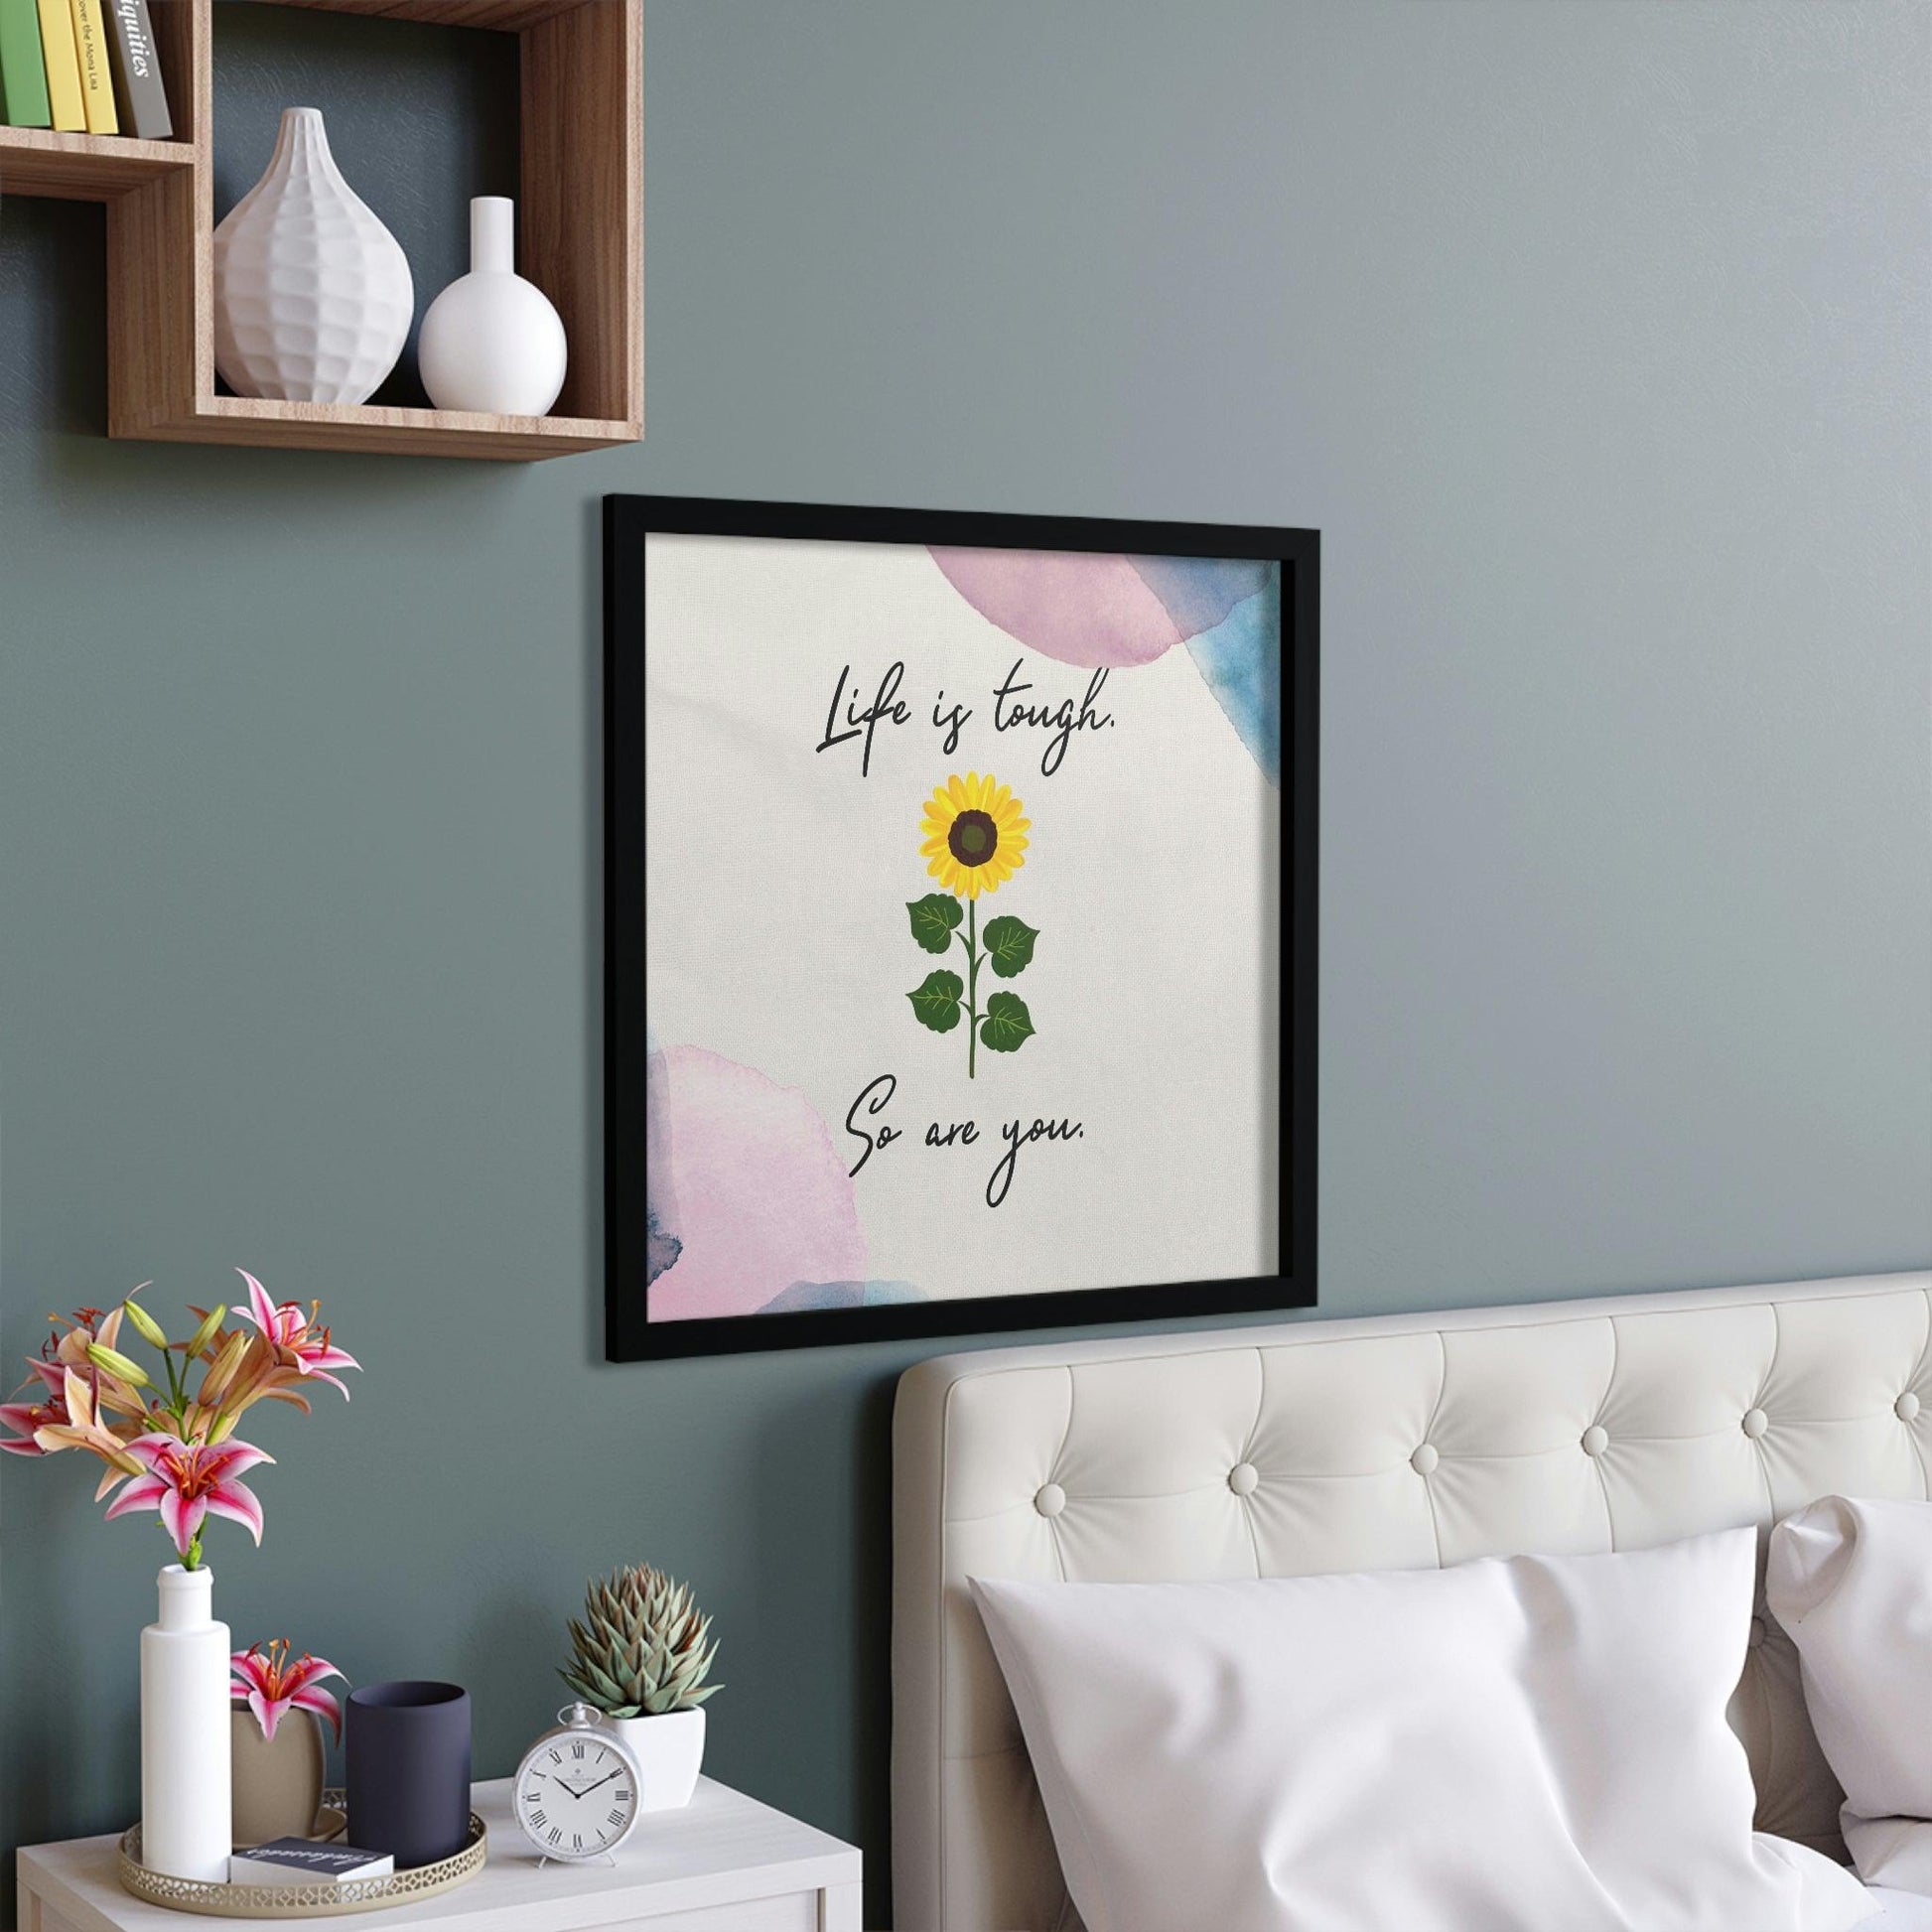 Life is tough. So are you Framed Poster Wall Art - MAIA HOMES